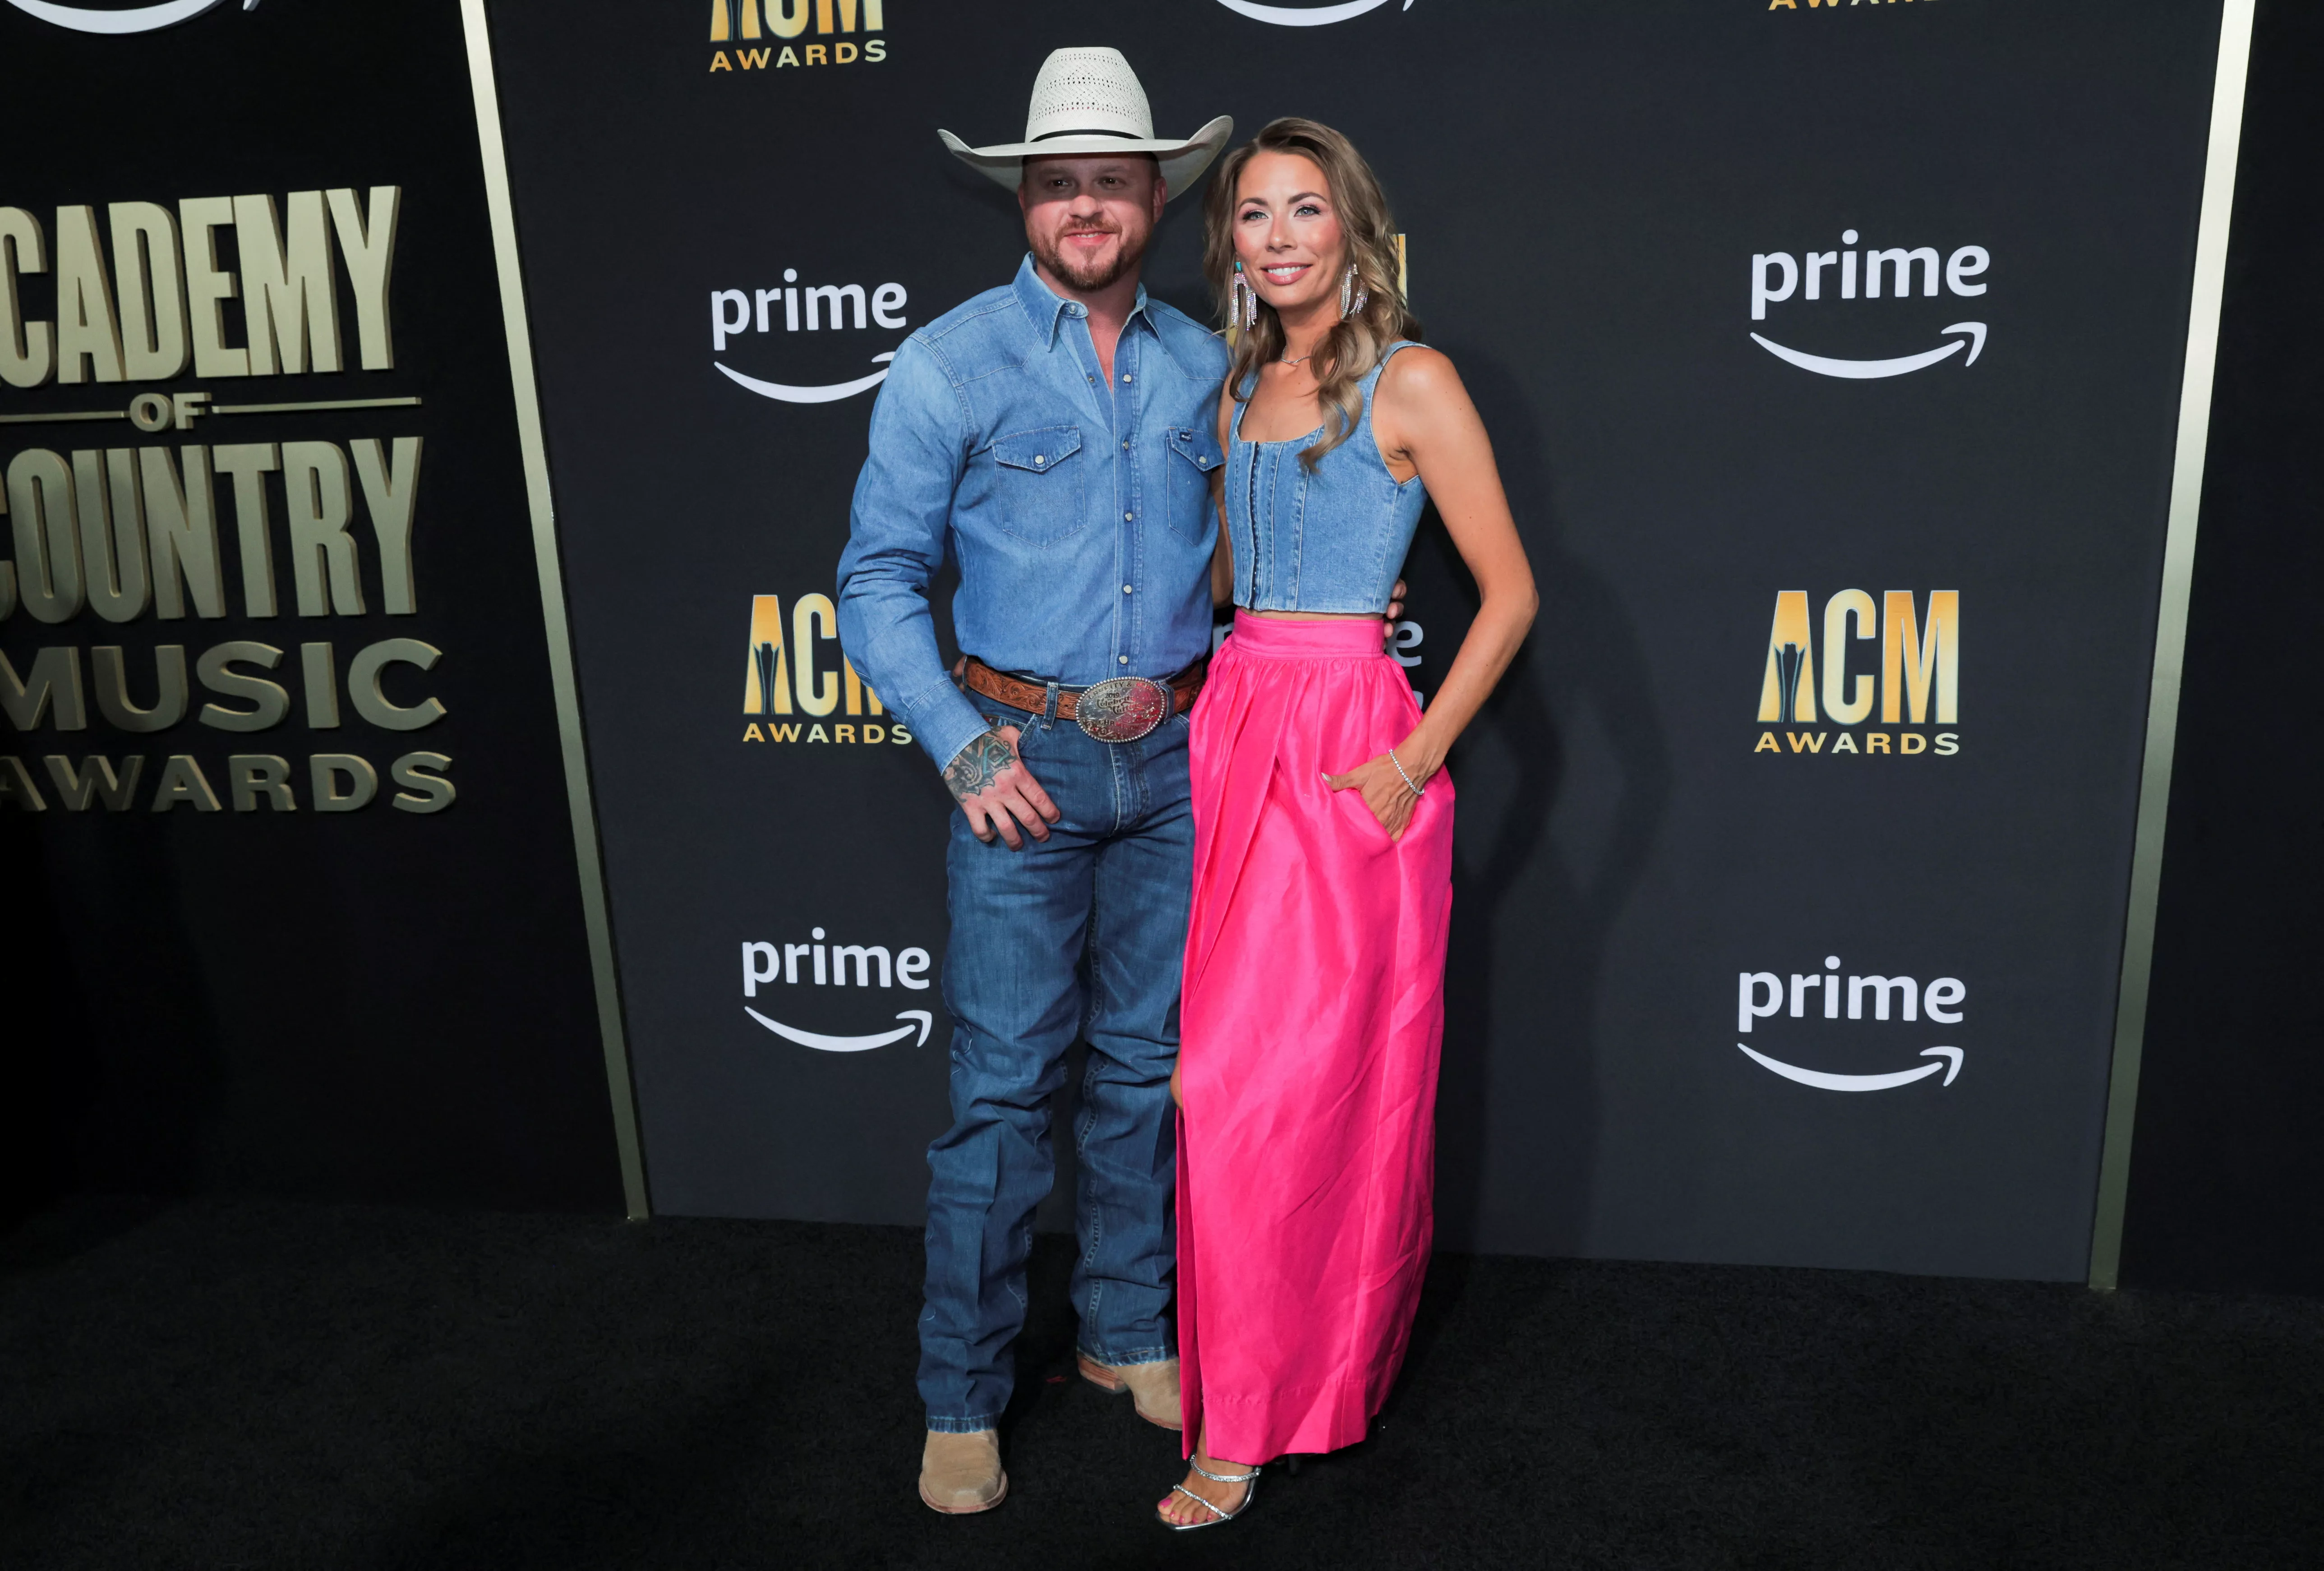 Cody Johnson Opens Up About New Album in Exclusive Interview | Woman's World